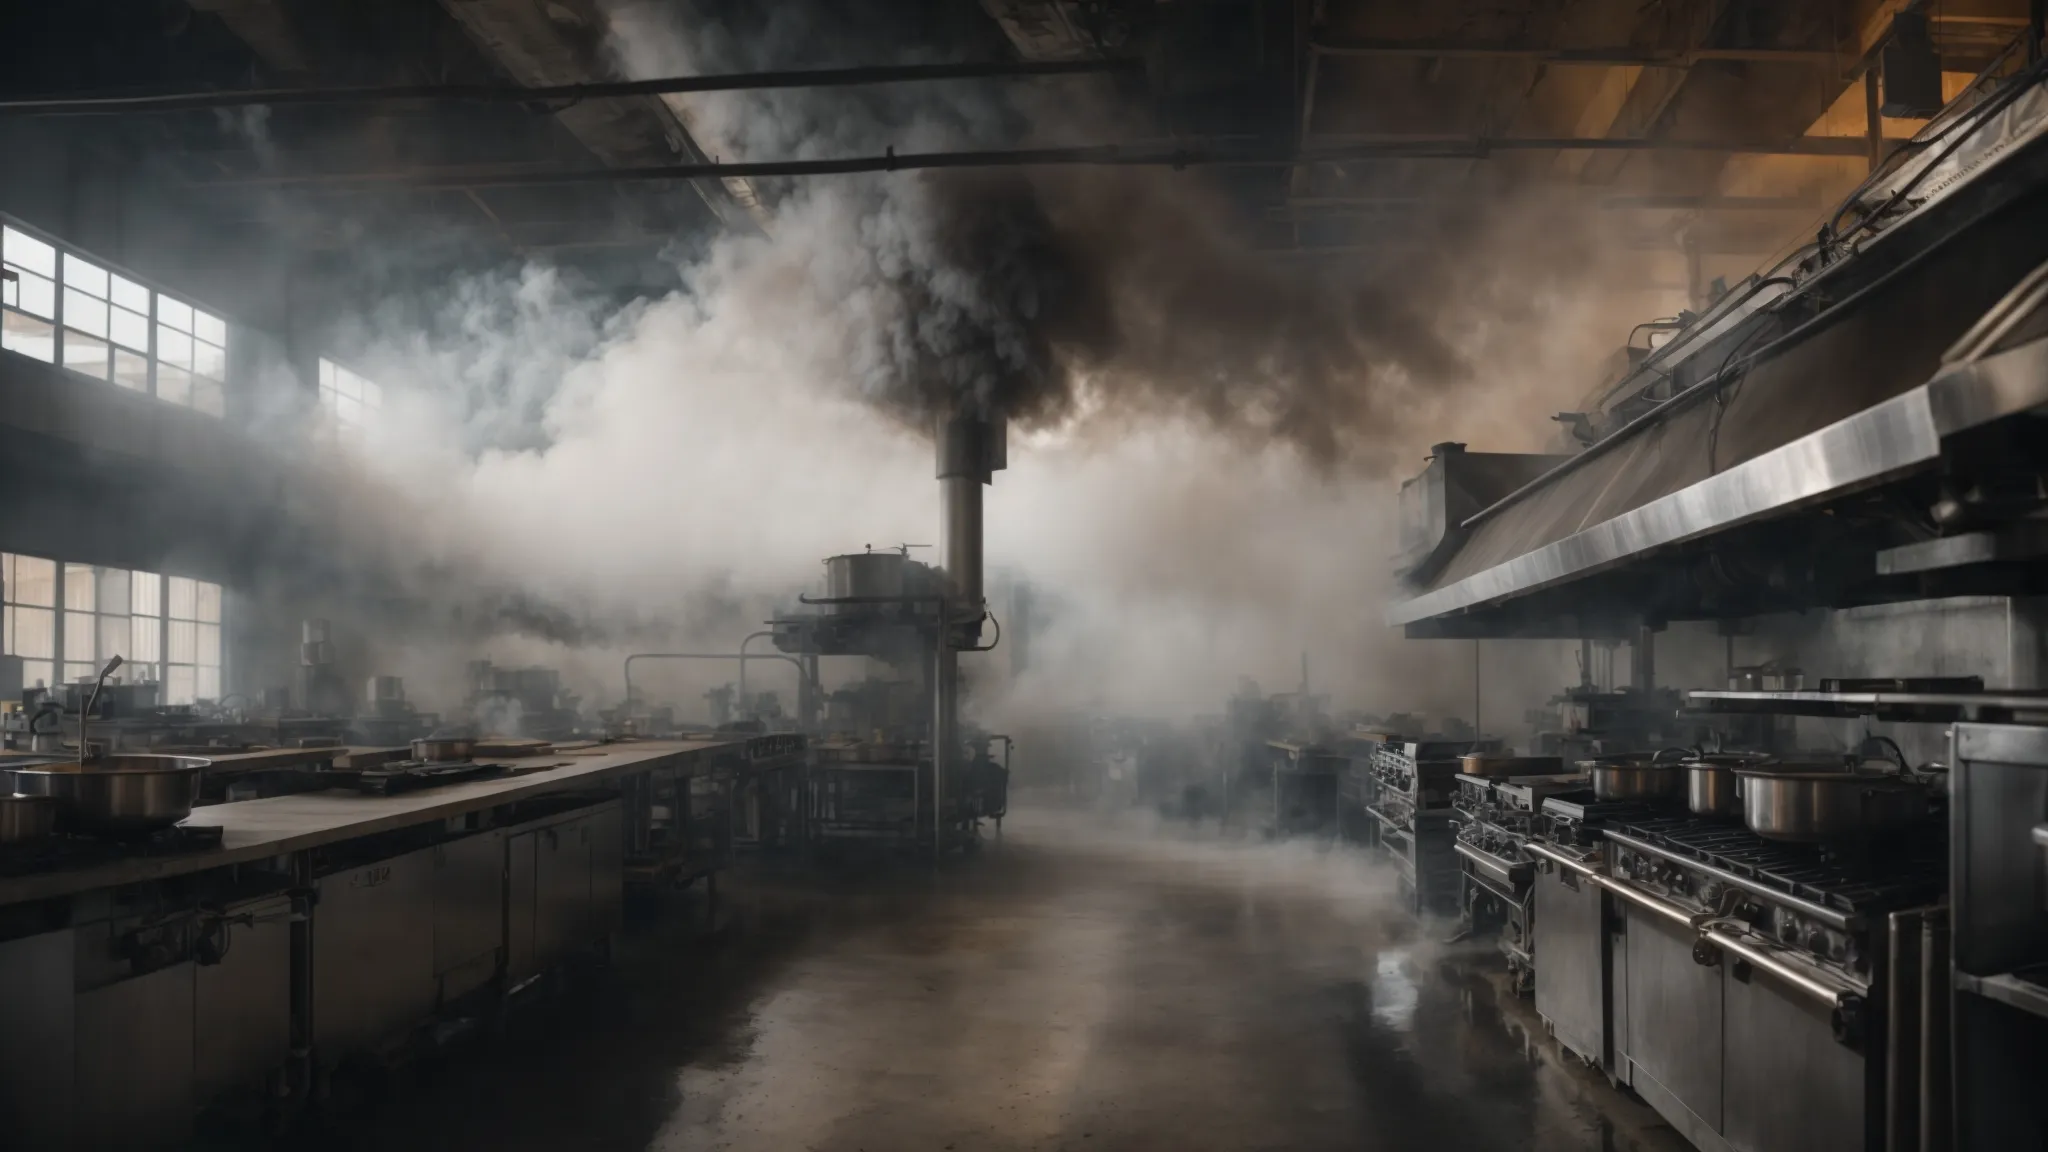 a wide shot of sprawling industrial kitchen facilities overshadowed by thick smoke plumes, awaiting deep cleaning operations.